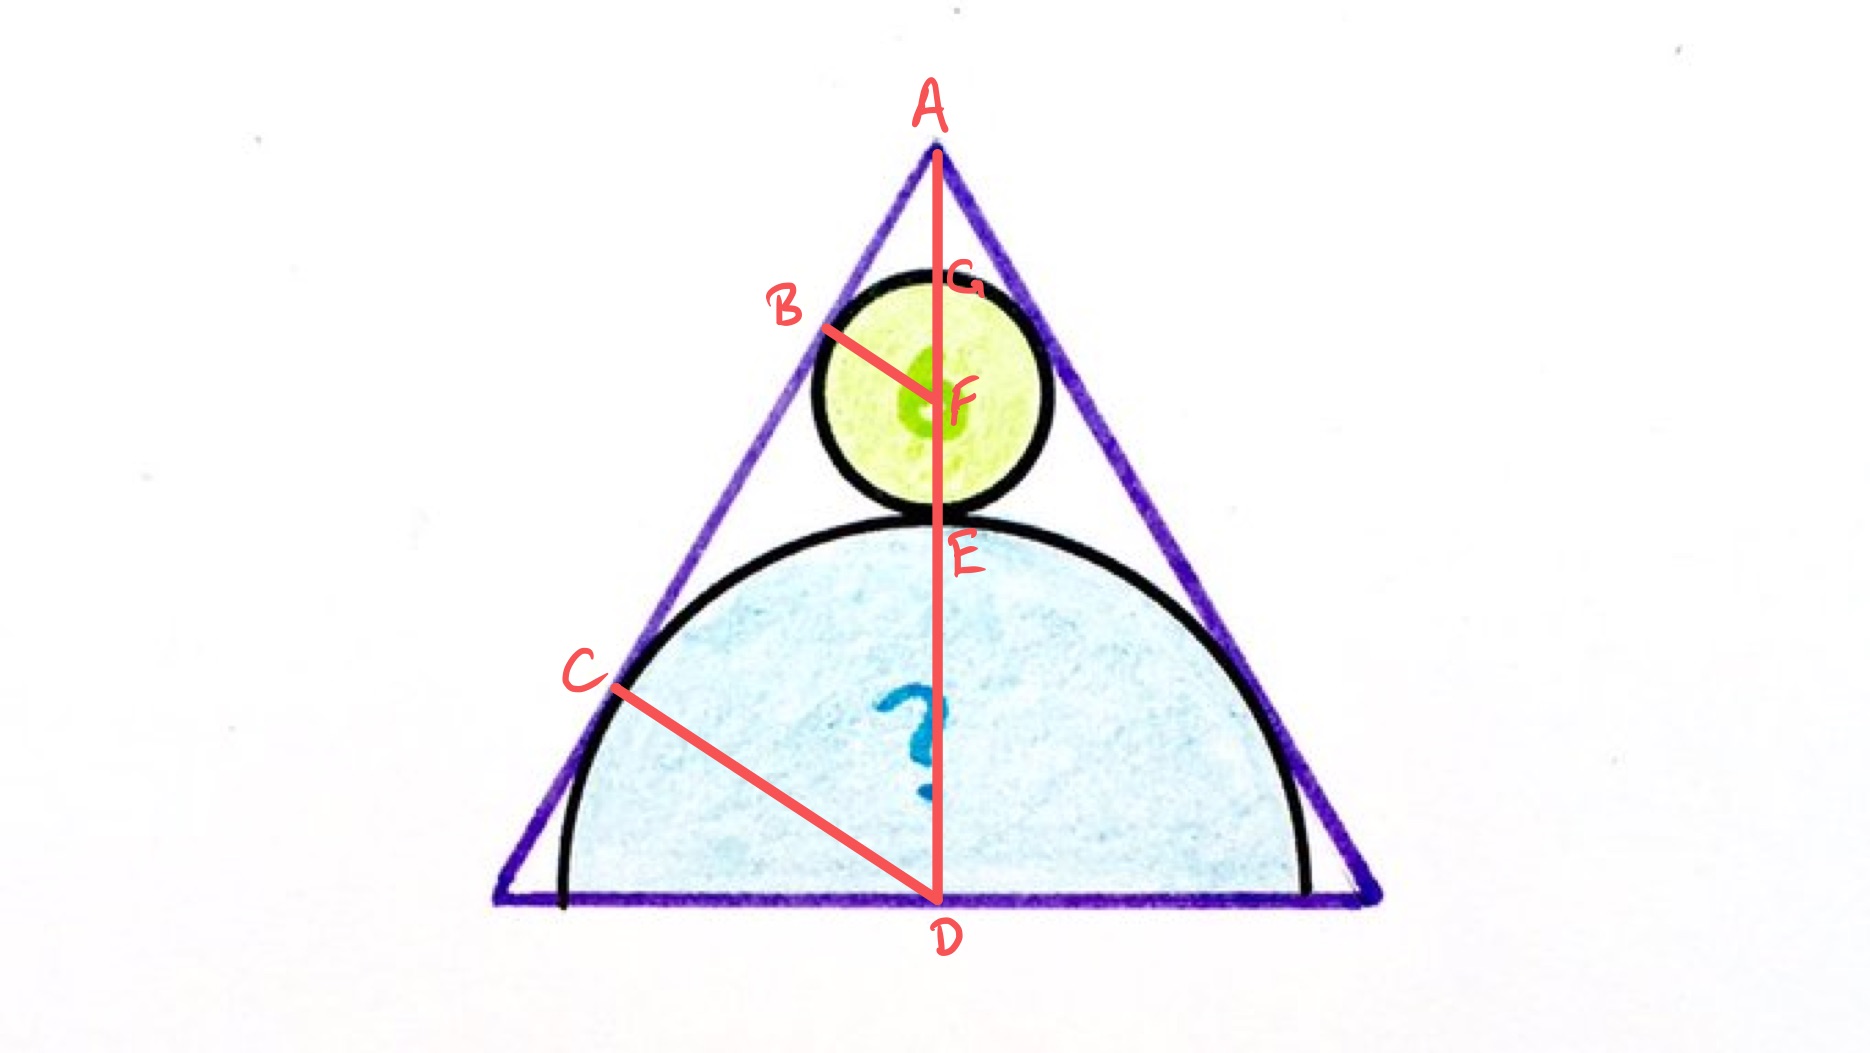 Circle and semi-circle in triangle labelled